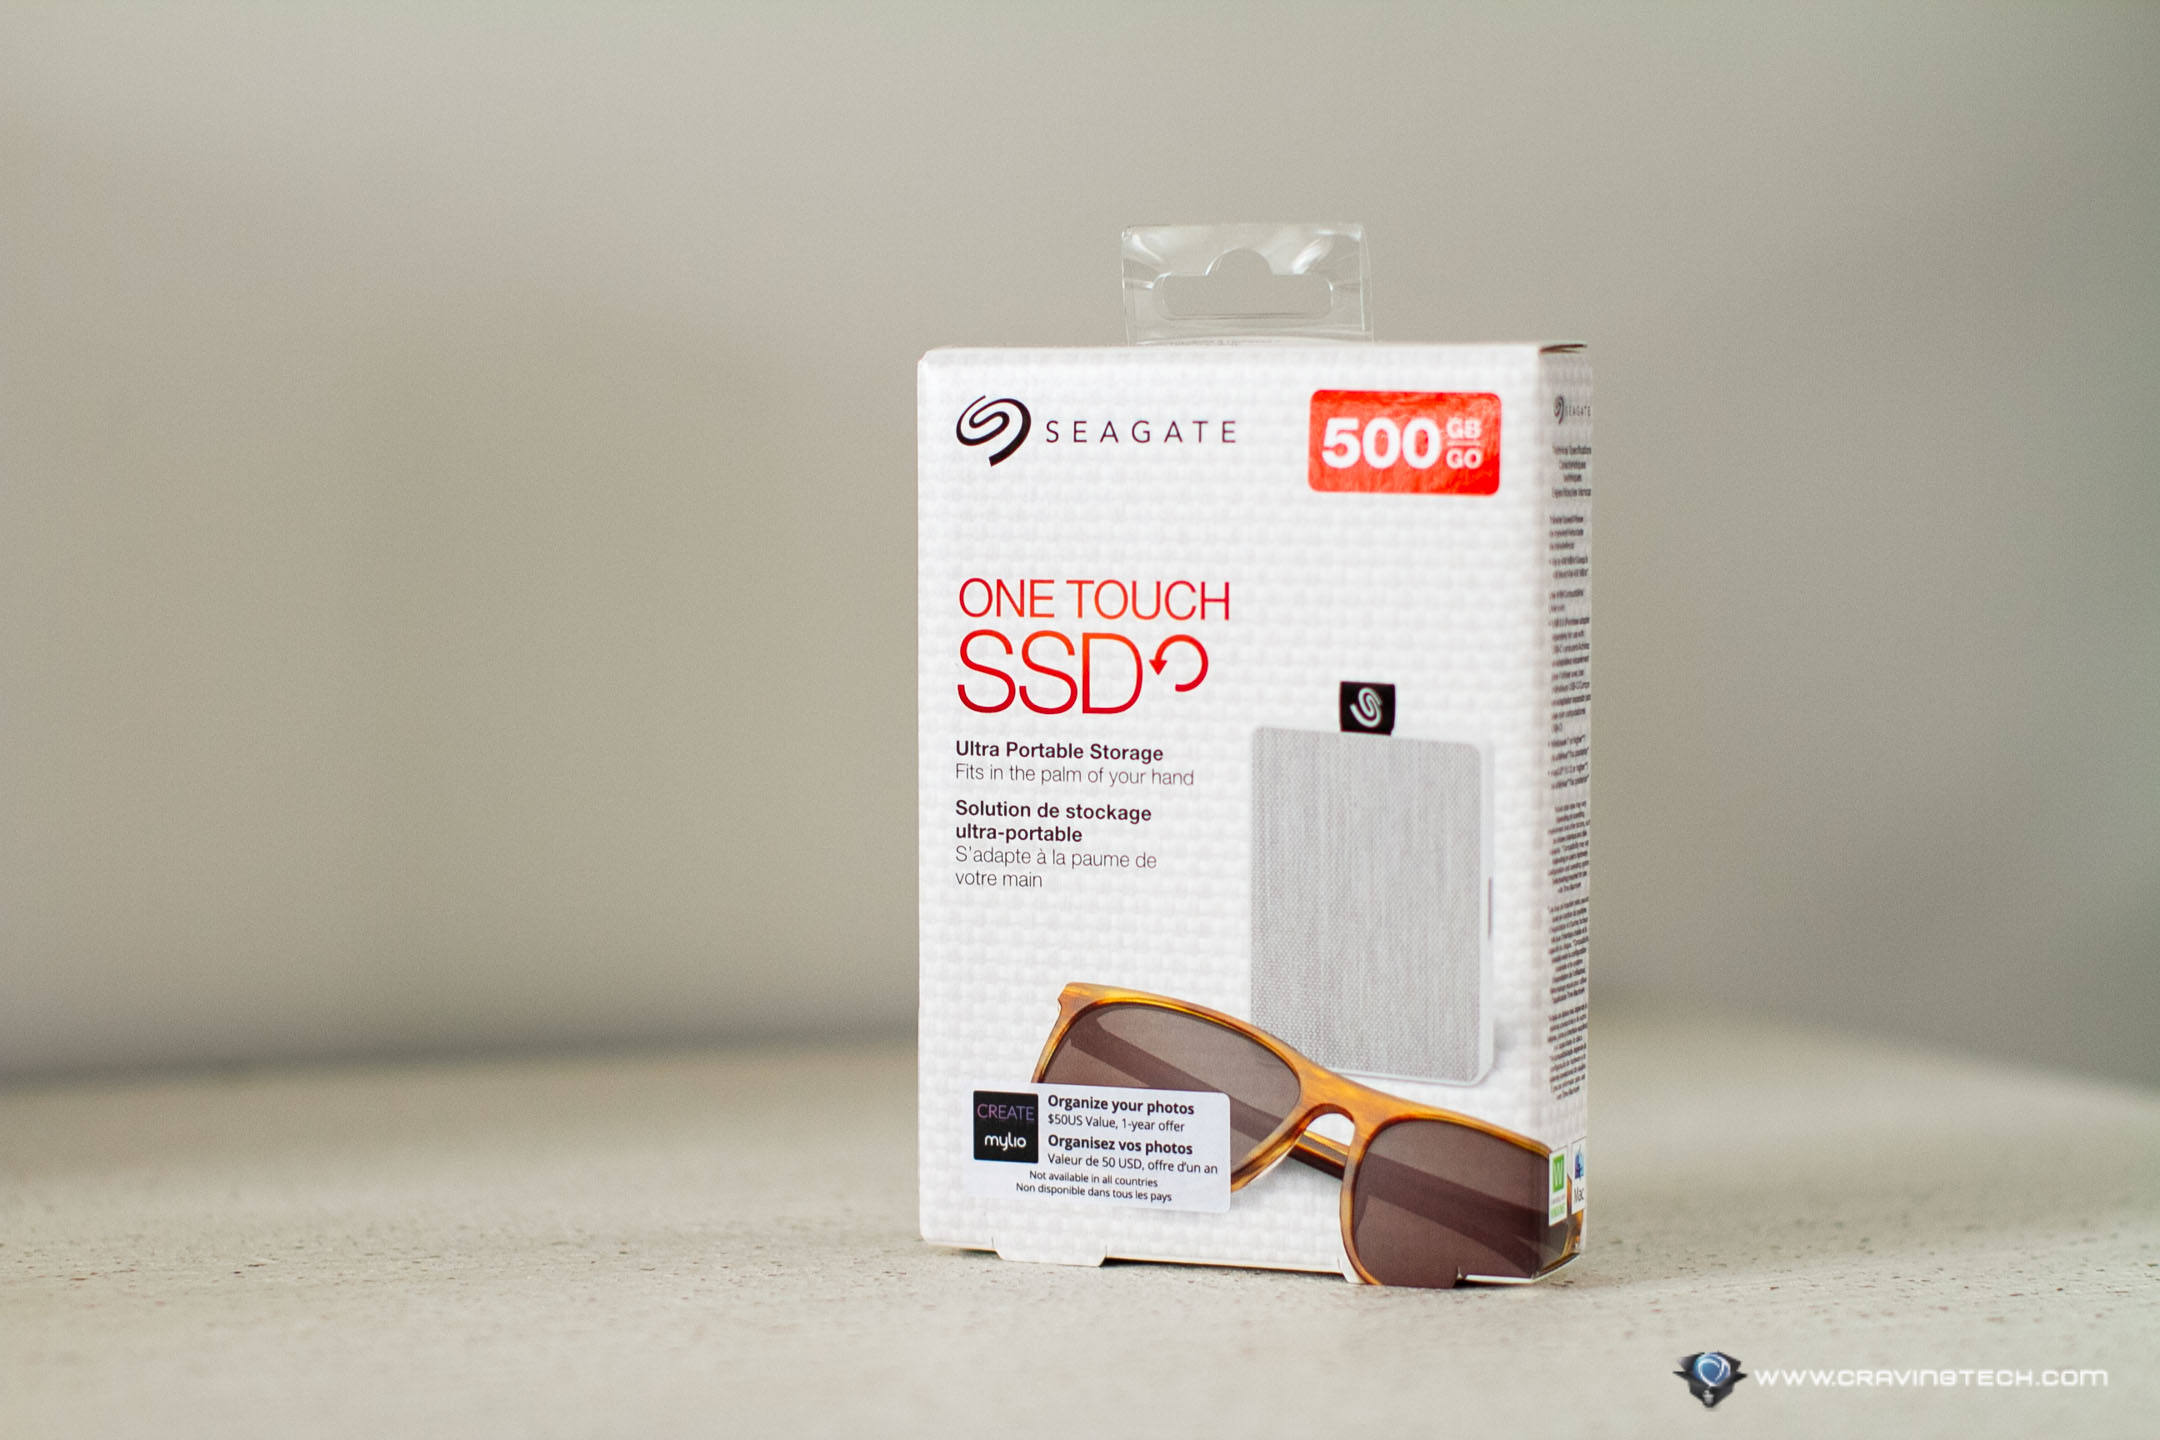 A mini, fast, external SSD - Seagate One Touch SSD Review